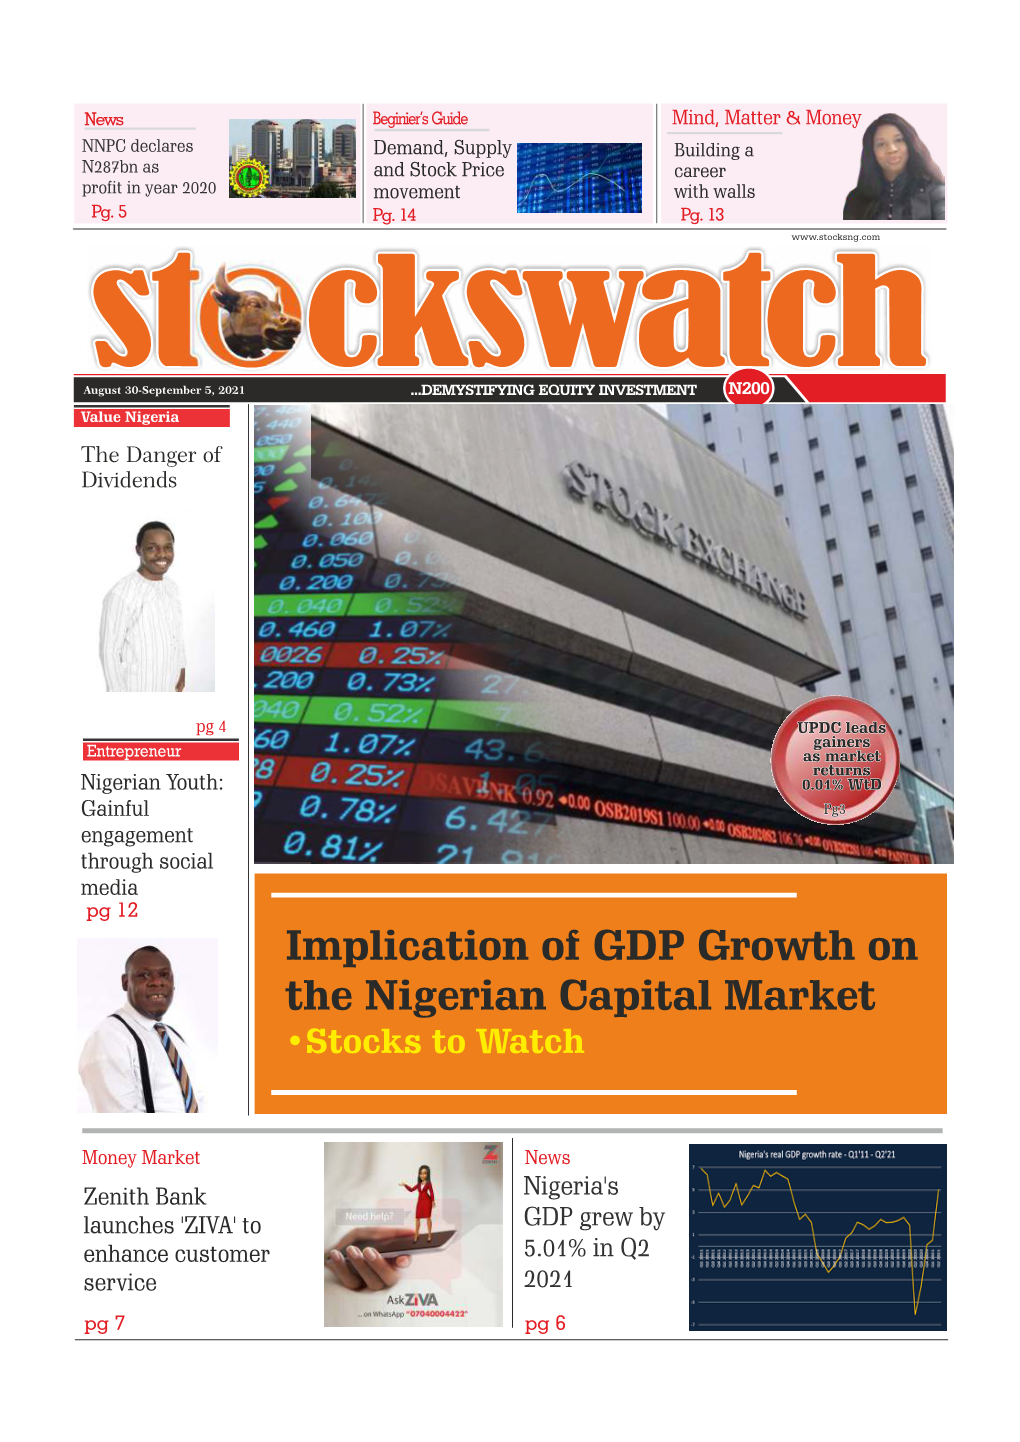 Implication of GDP Growth on the Nigerian Capital Market •Stocks to Watch